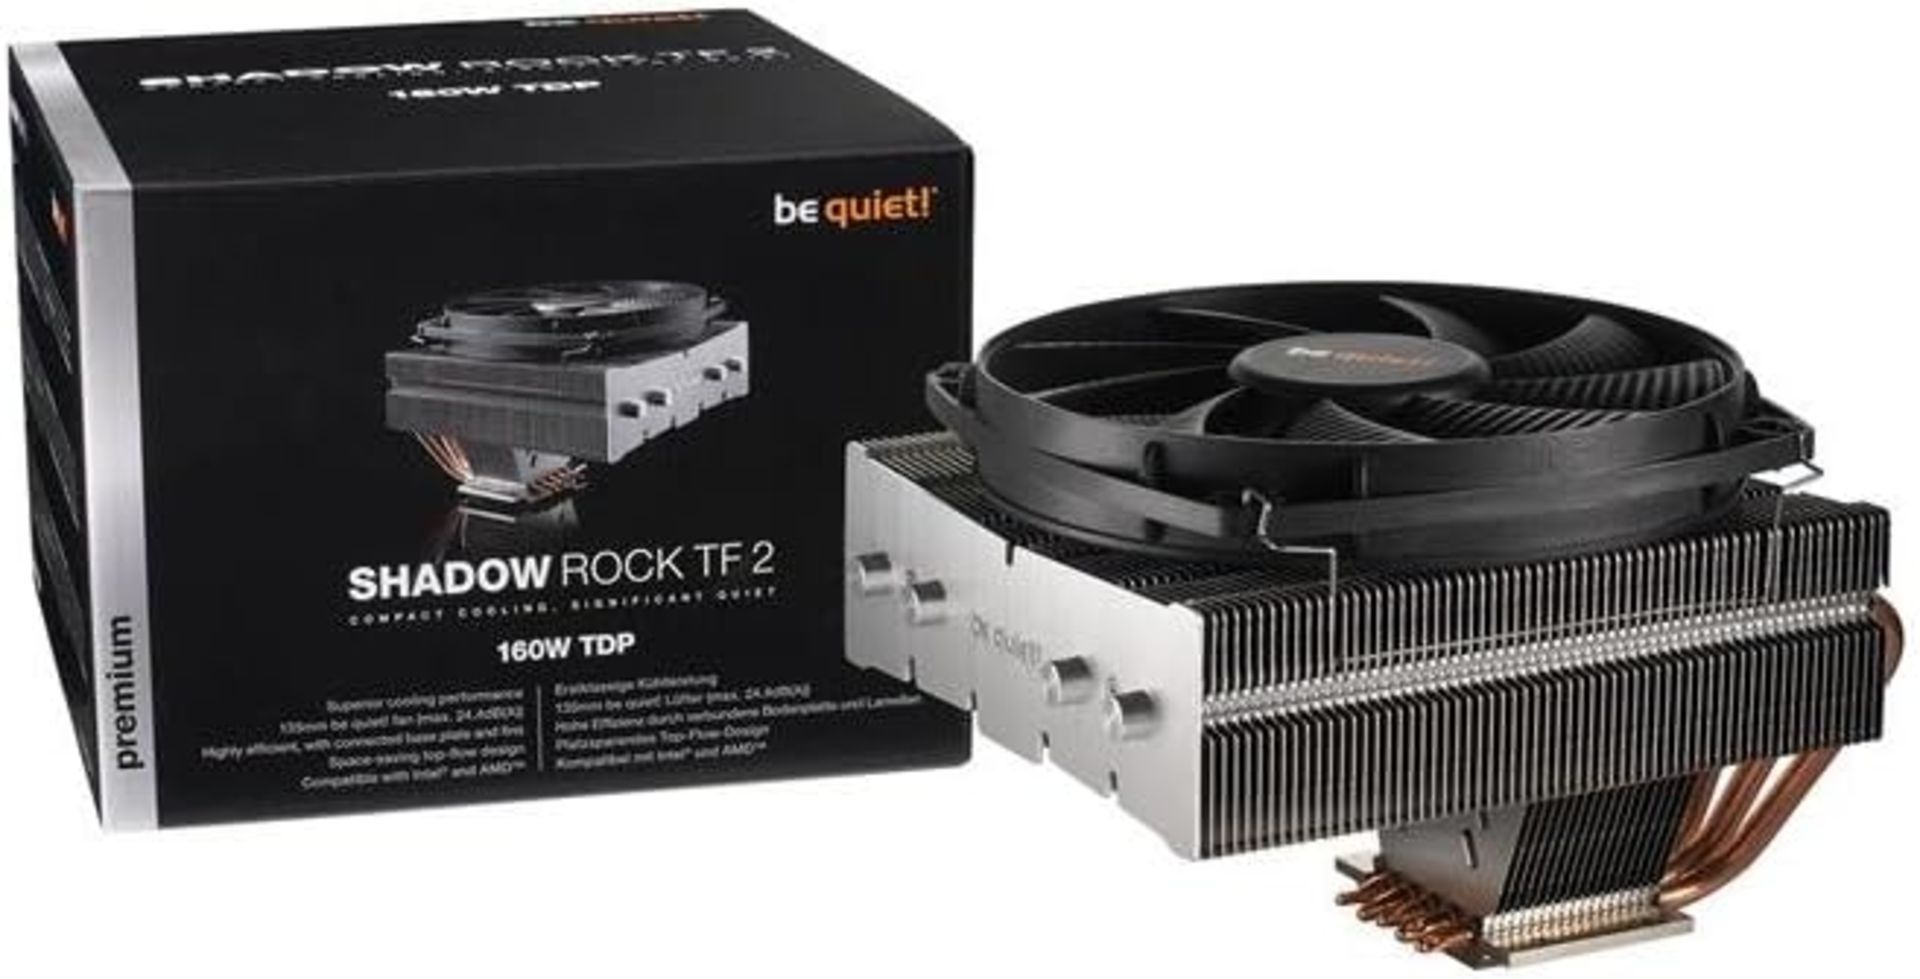 NEW & BOXED BE QUIET! Shadow Rock TF 2 CPU Cooler. RRP £59.99. Shadow Rock TF 2 is the perfect - Bild 7 aus 7